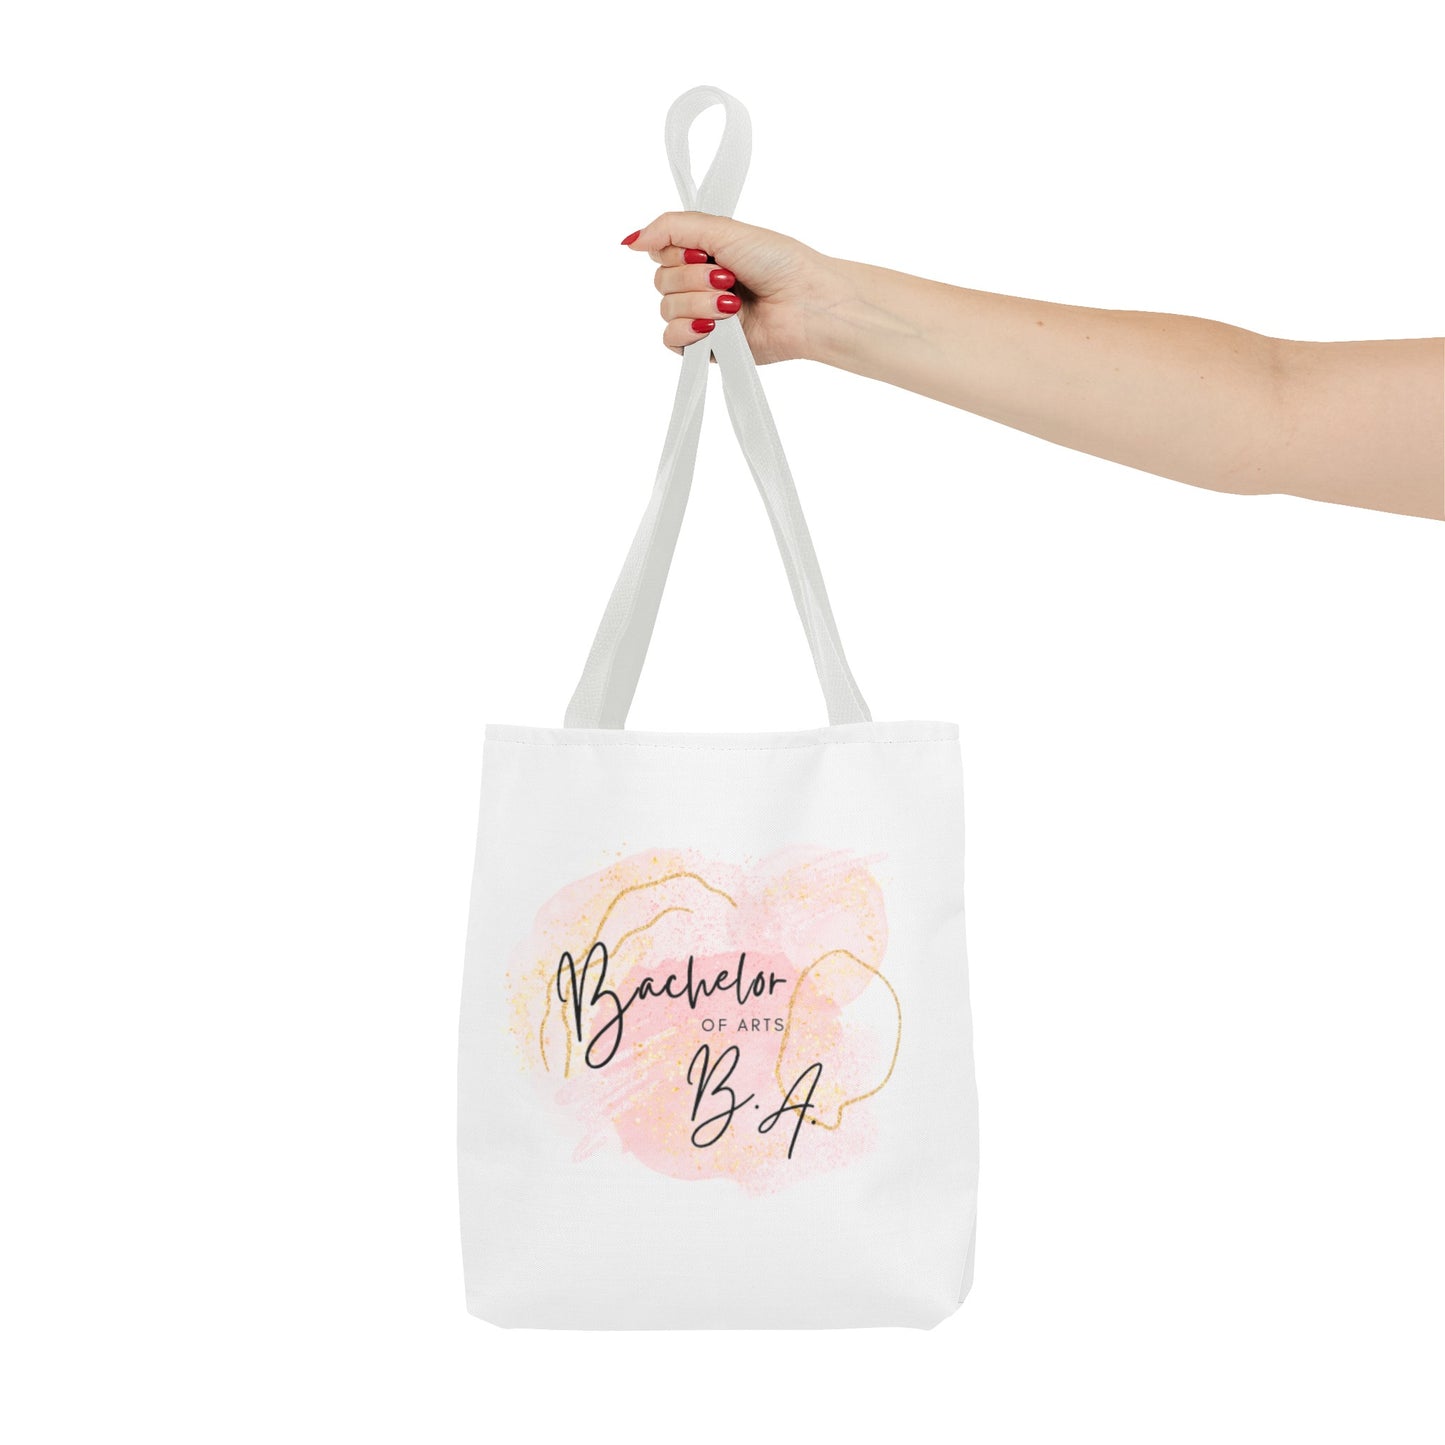 B.A. - Tote bags with bachelor of arts credentials